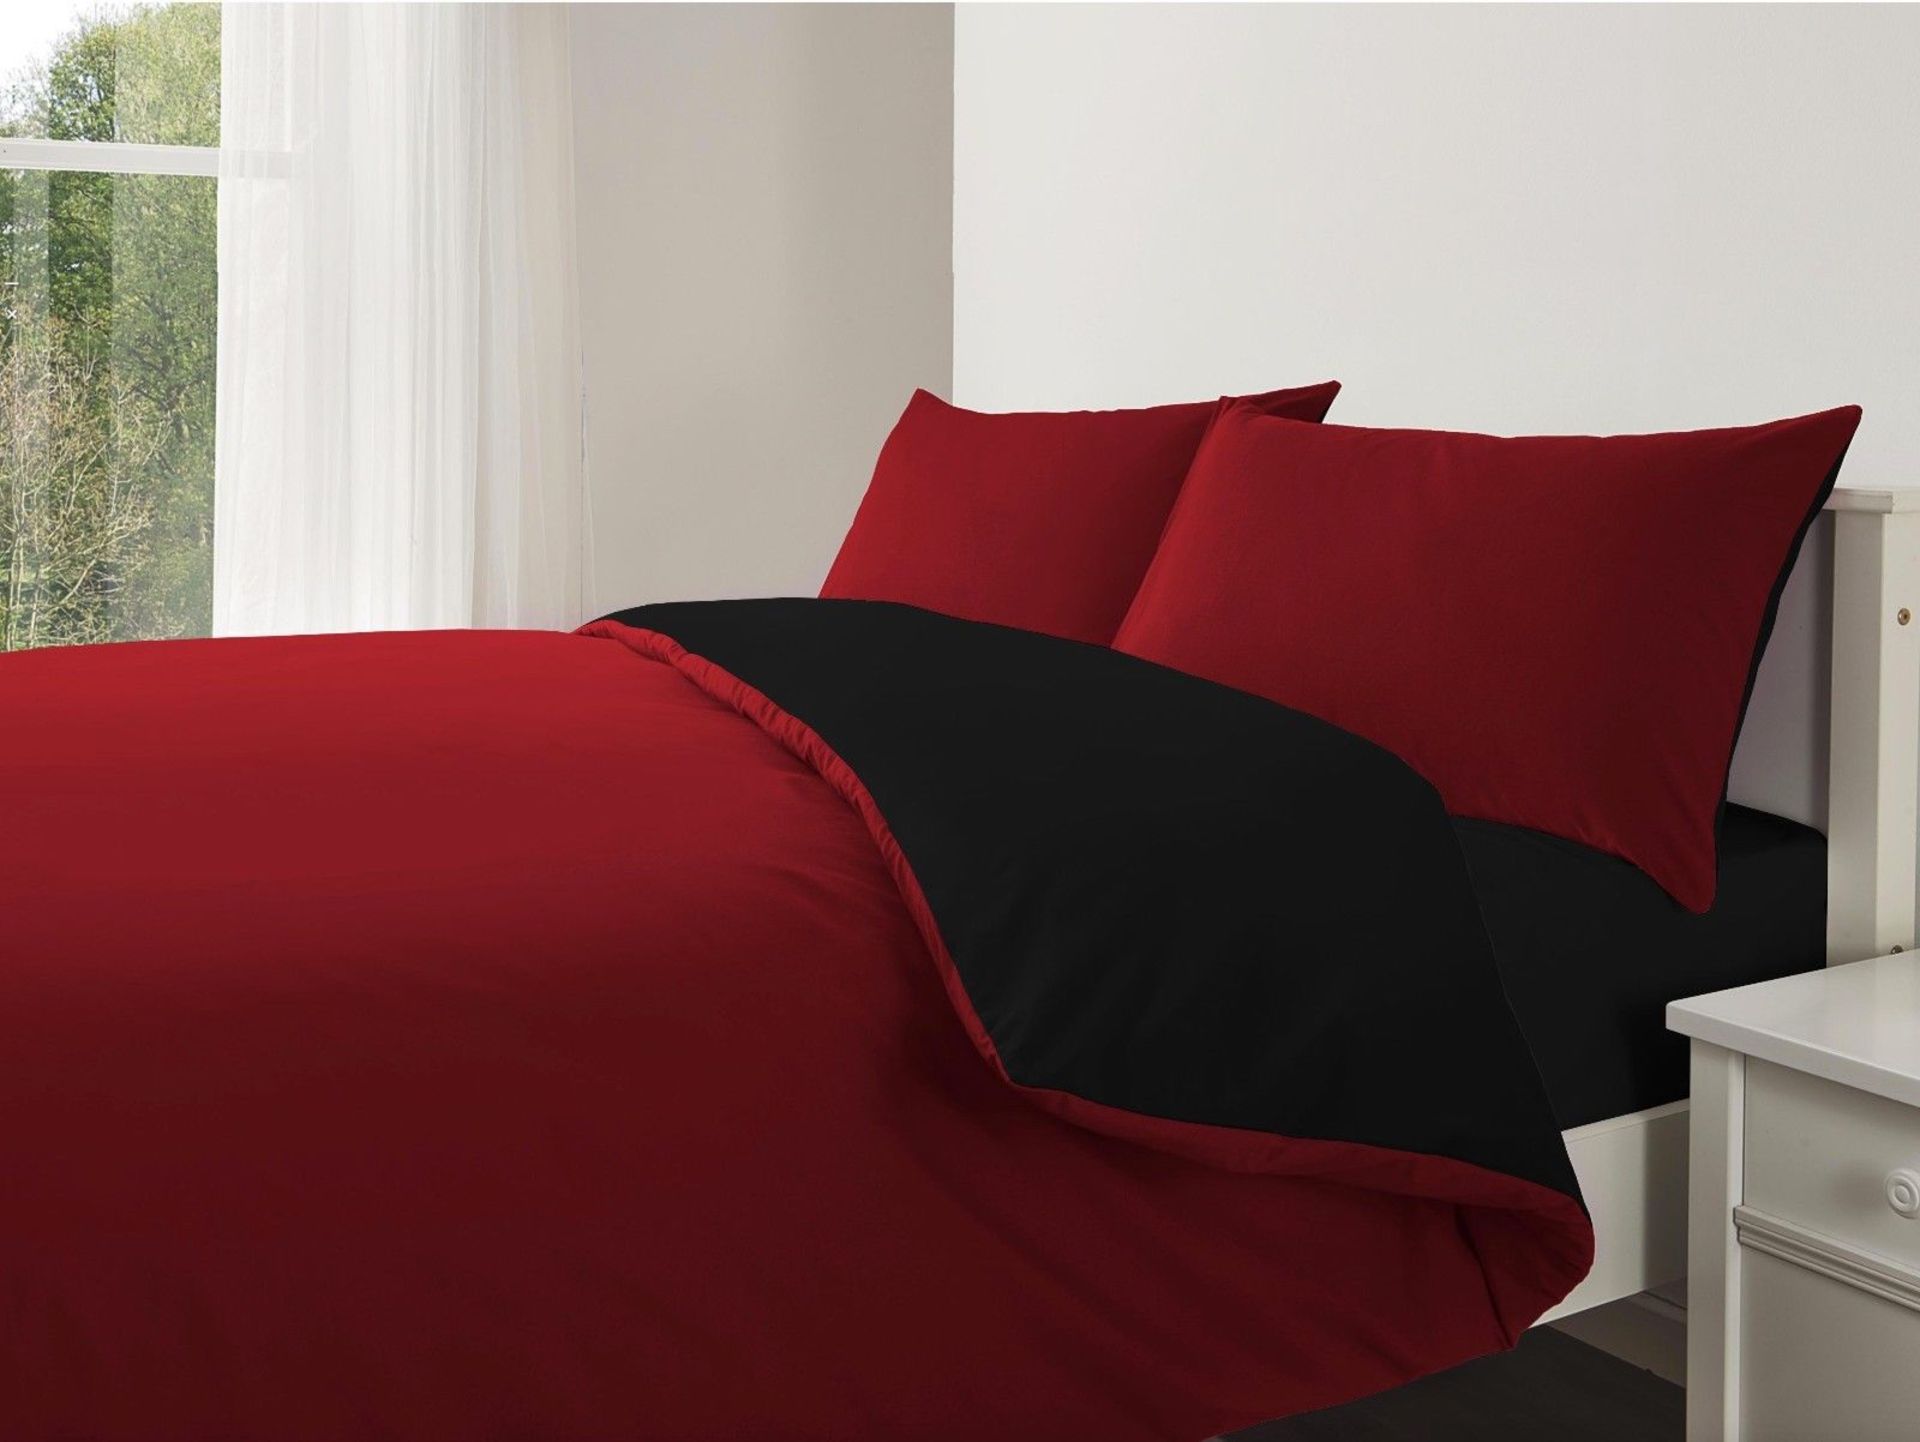 V Brand New Red & Black Complete Reversible Double Bed Set Incldes - 1 Duvet Cover - 1 Fitted